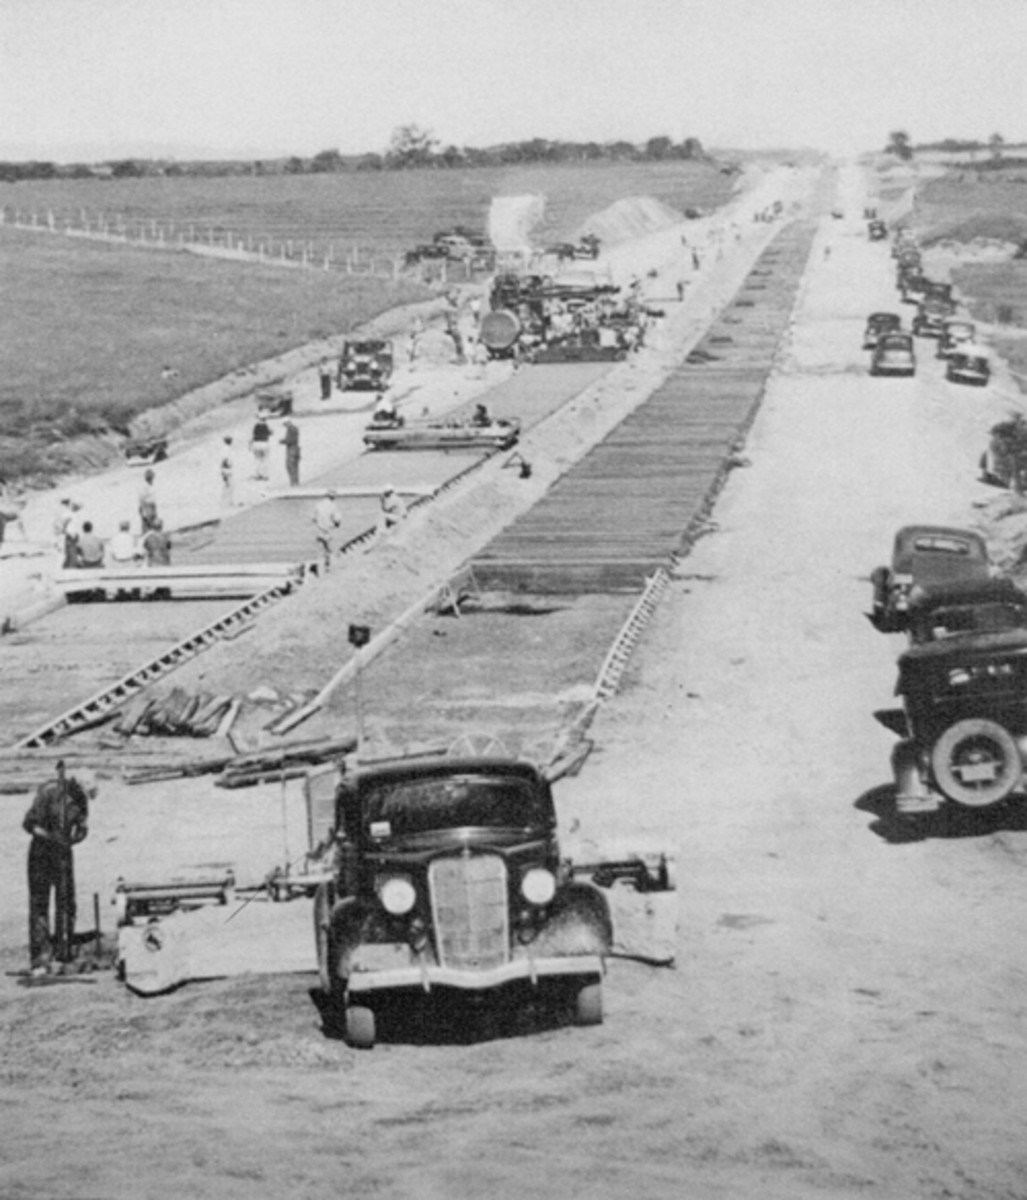 Thanks to 15,000 workers from 155 contractors in 18 different states, it took just 23 months and five days to complete the Pennsylvania Turnpike following the formal groundbreaking on October 27, 1938. At the project's peak there were over 50 paving units laying up to three-and-a-half miles of concrete a day.